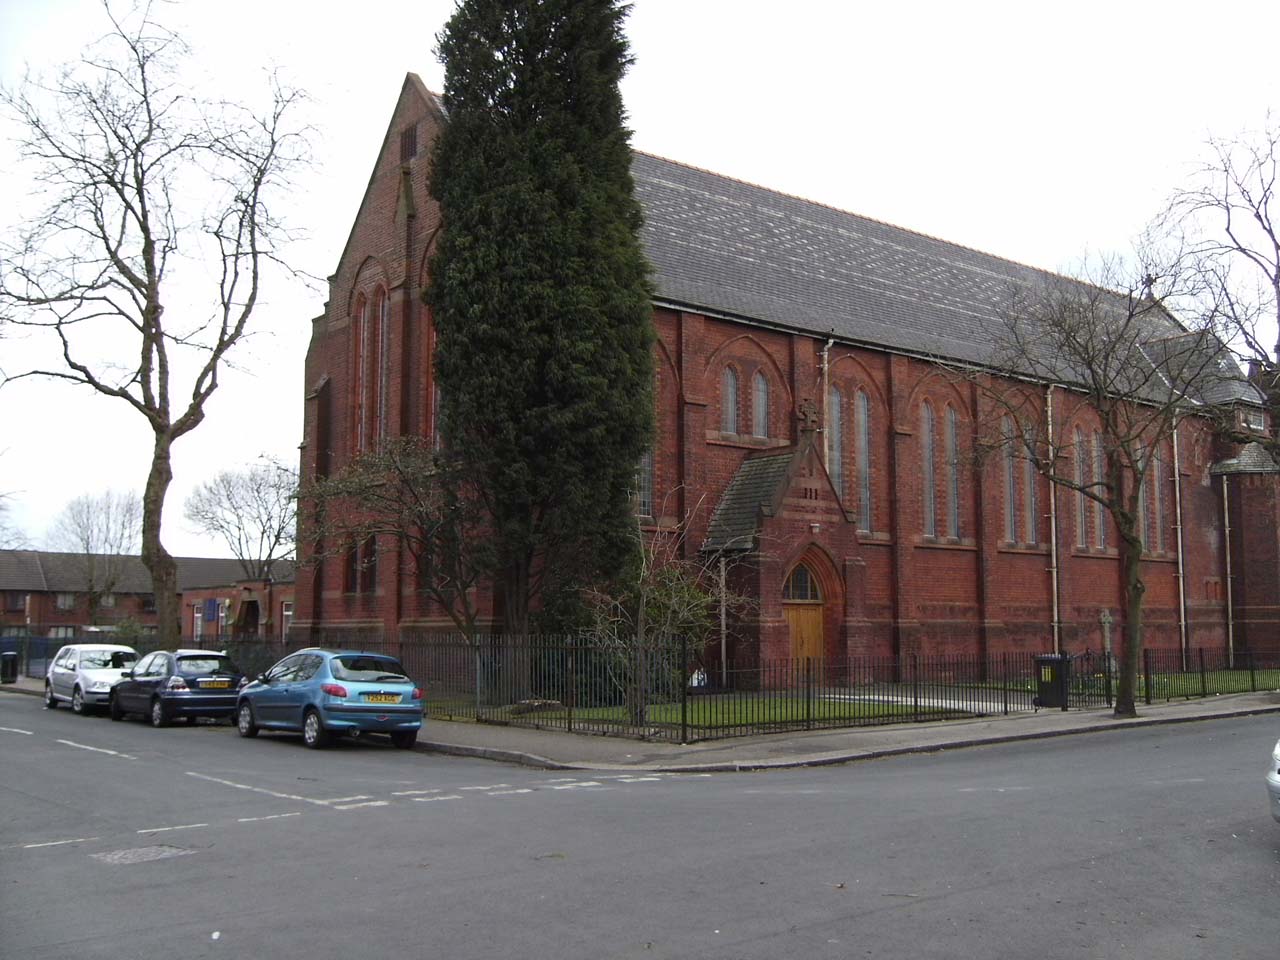 The Church of St Peter, Farnworth with Kearsley